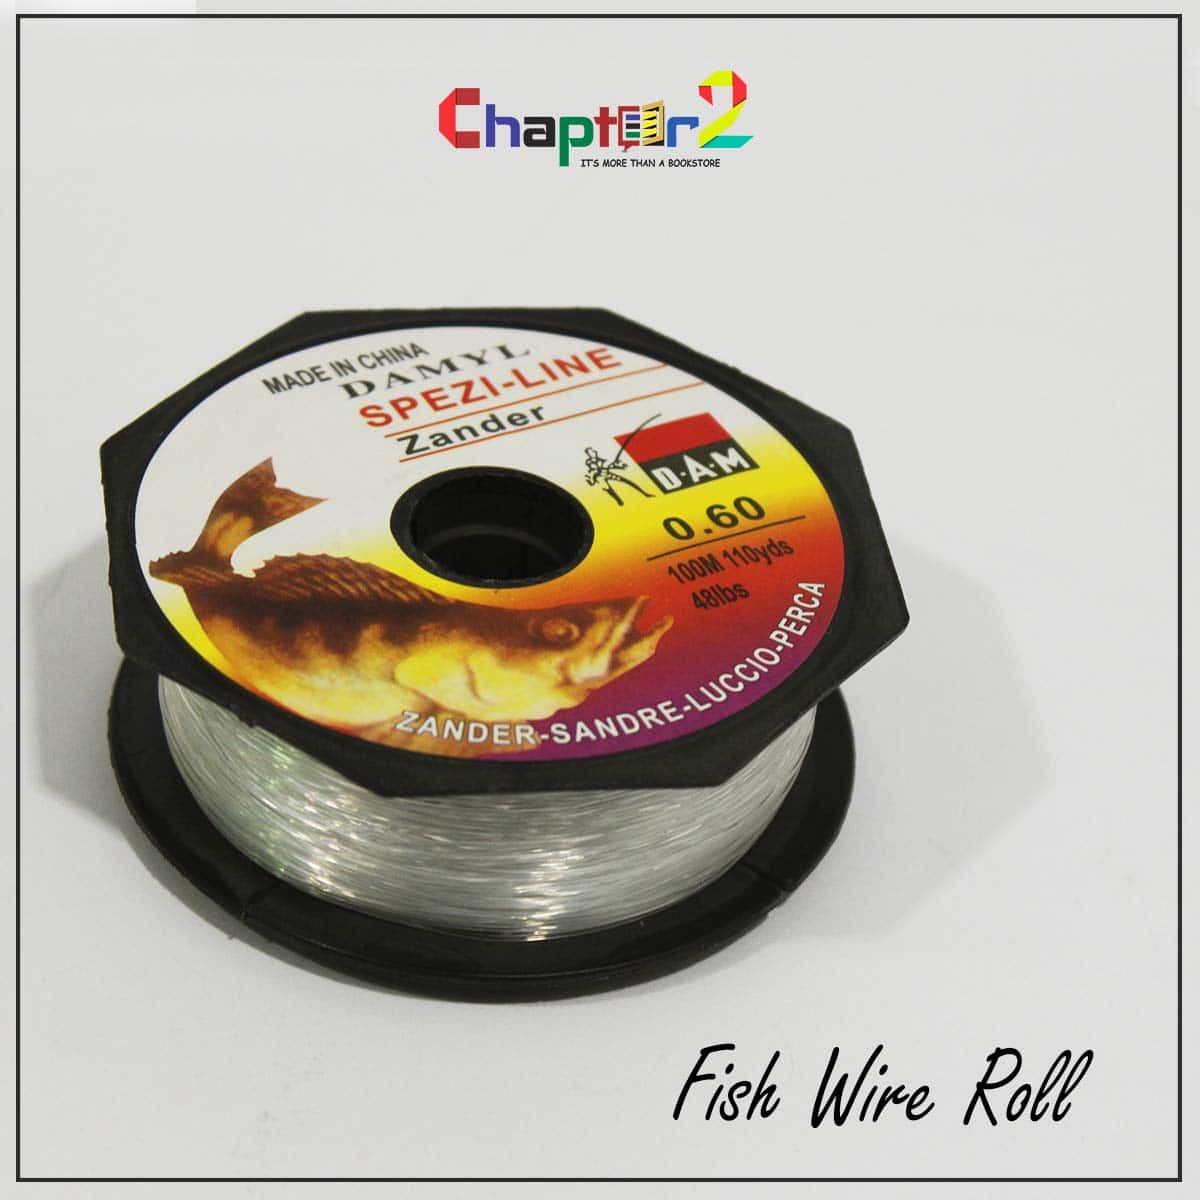 Fish Wire Roll - Chapter 2 - Books - Arts & Crafts - Party Decor